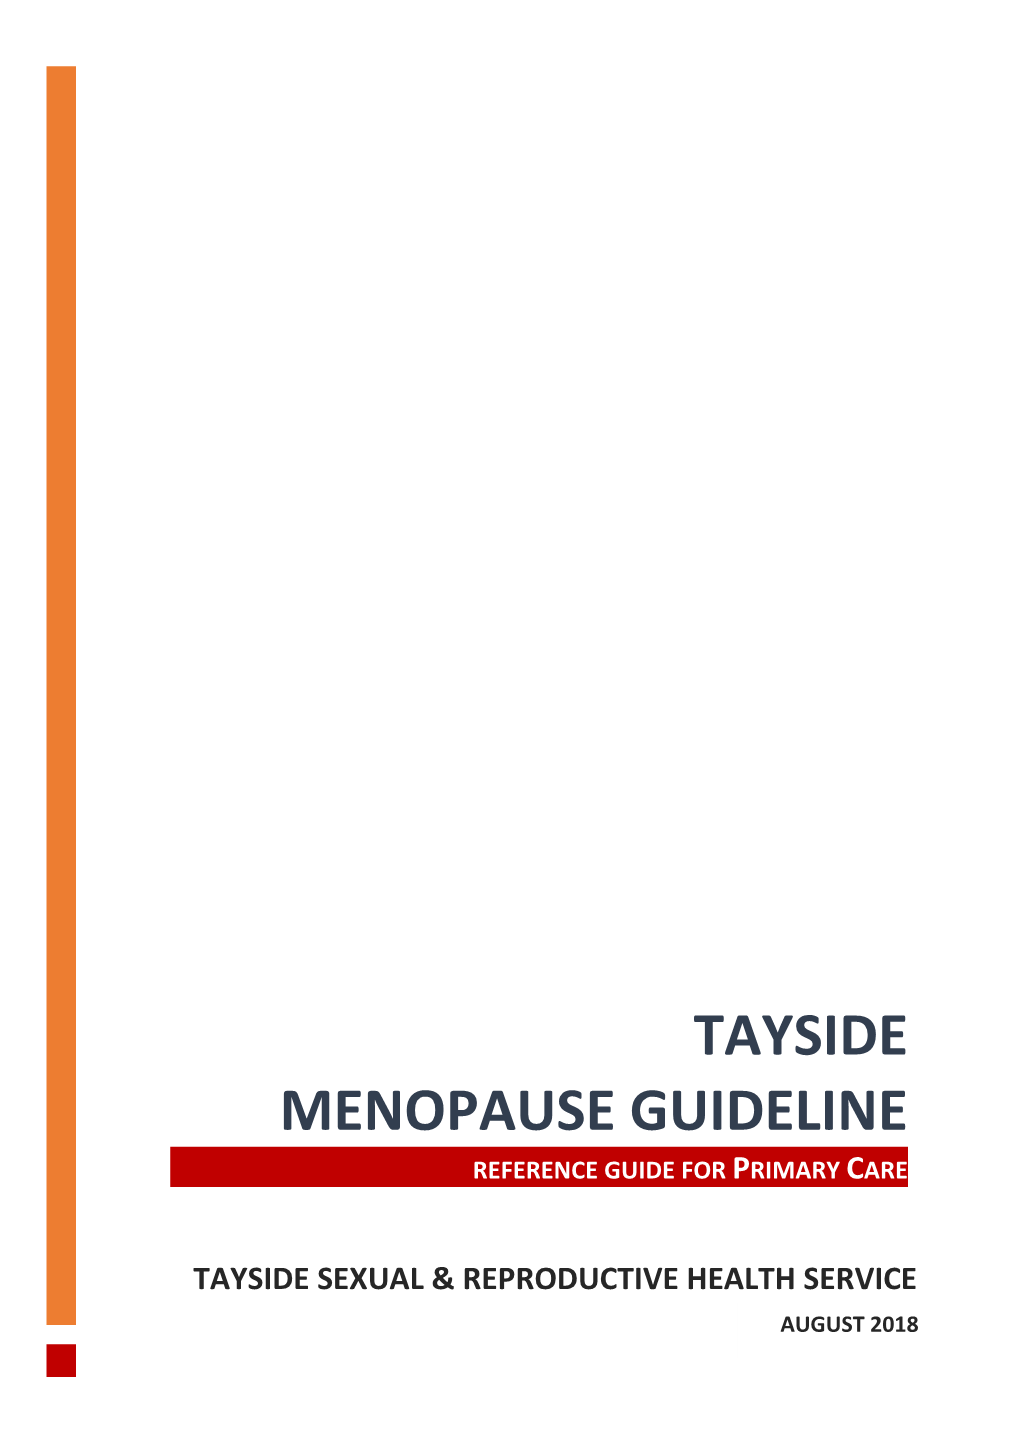 Tayside Menopause Guideline Reference Guide for Primary Care